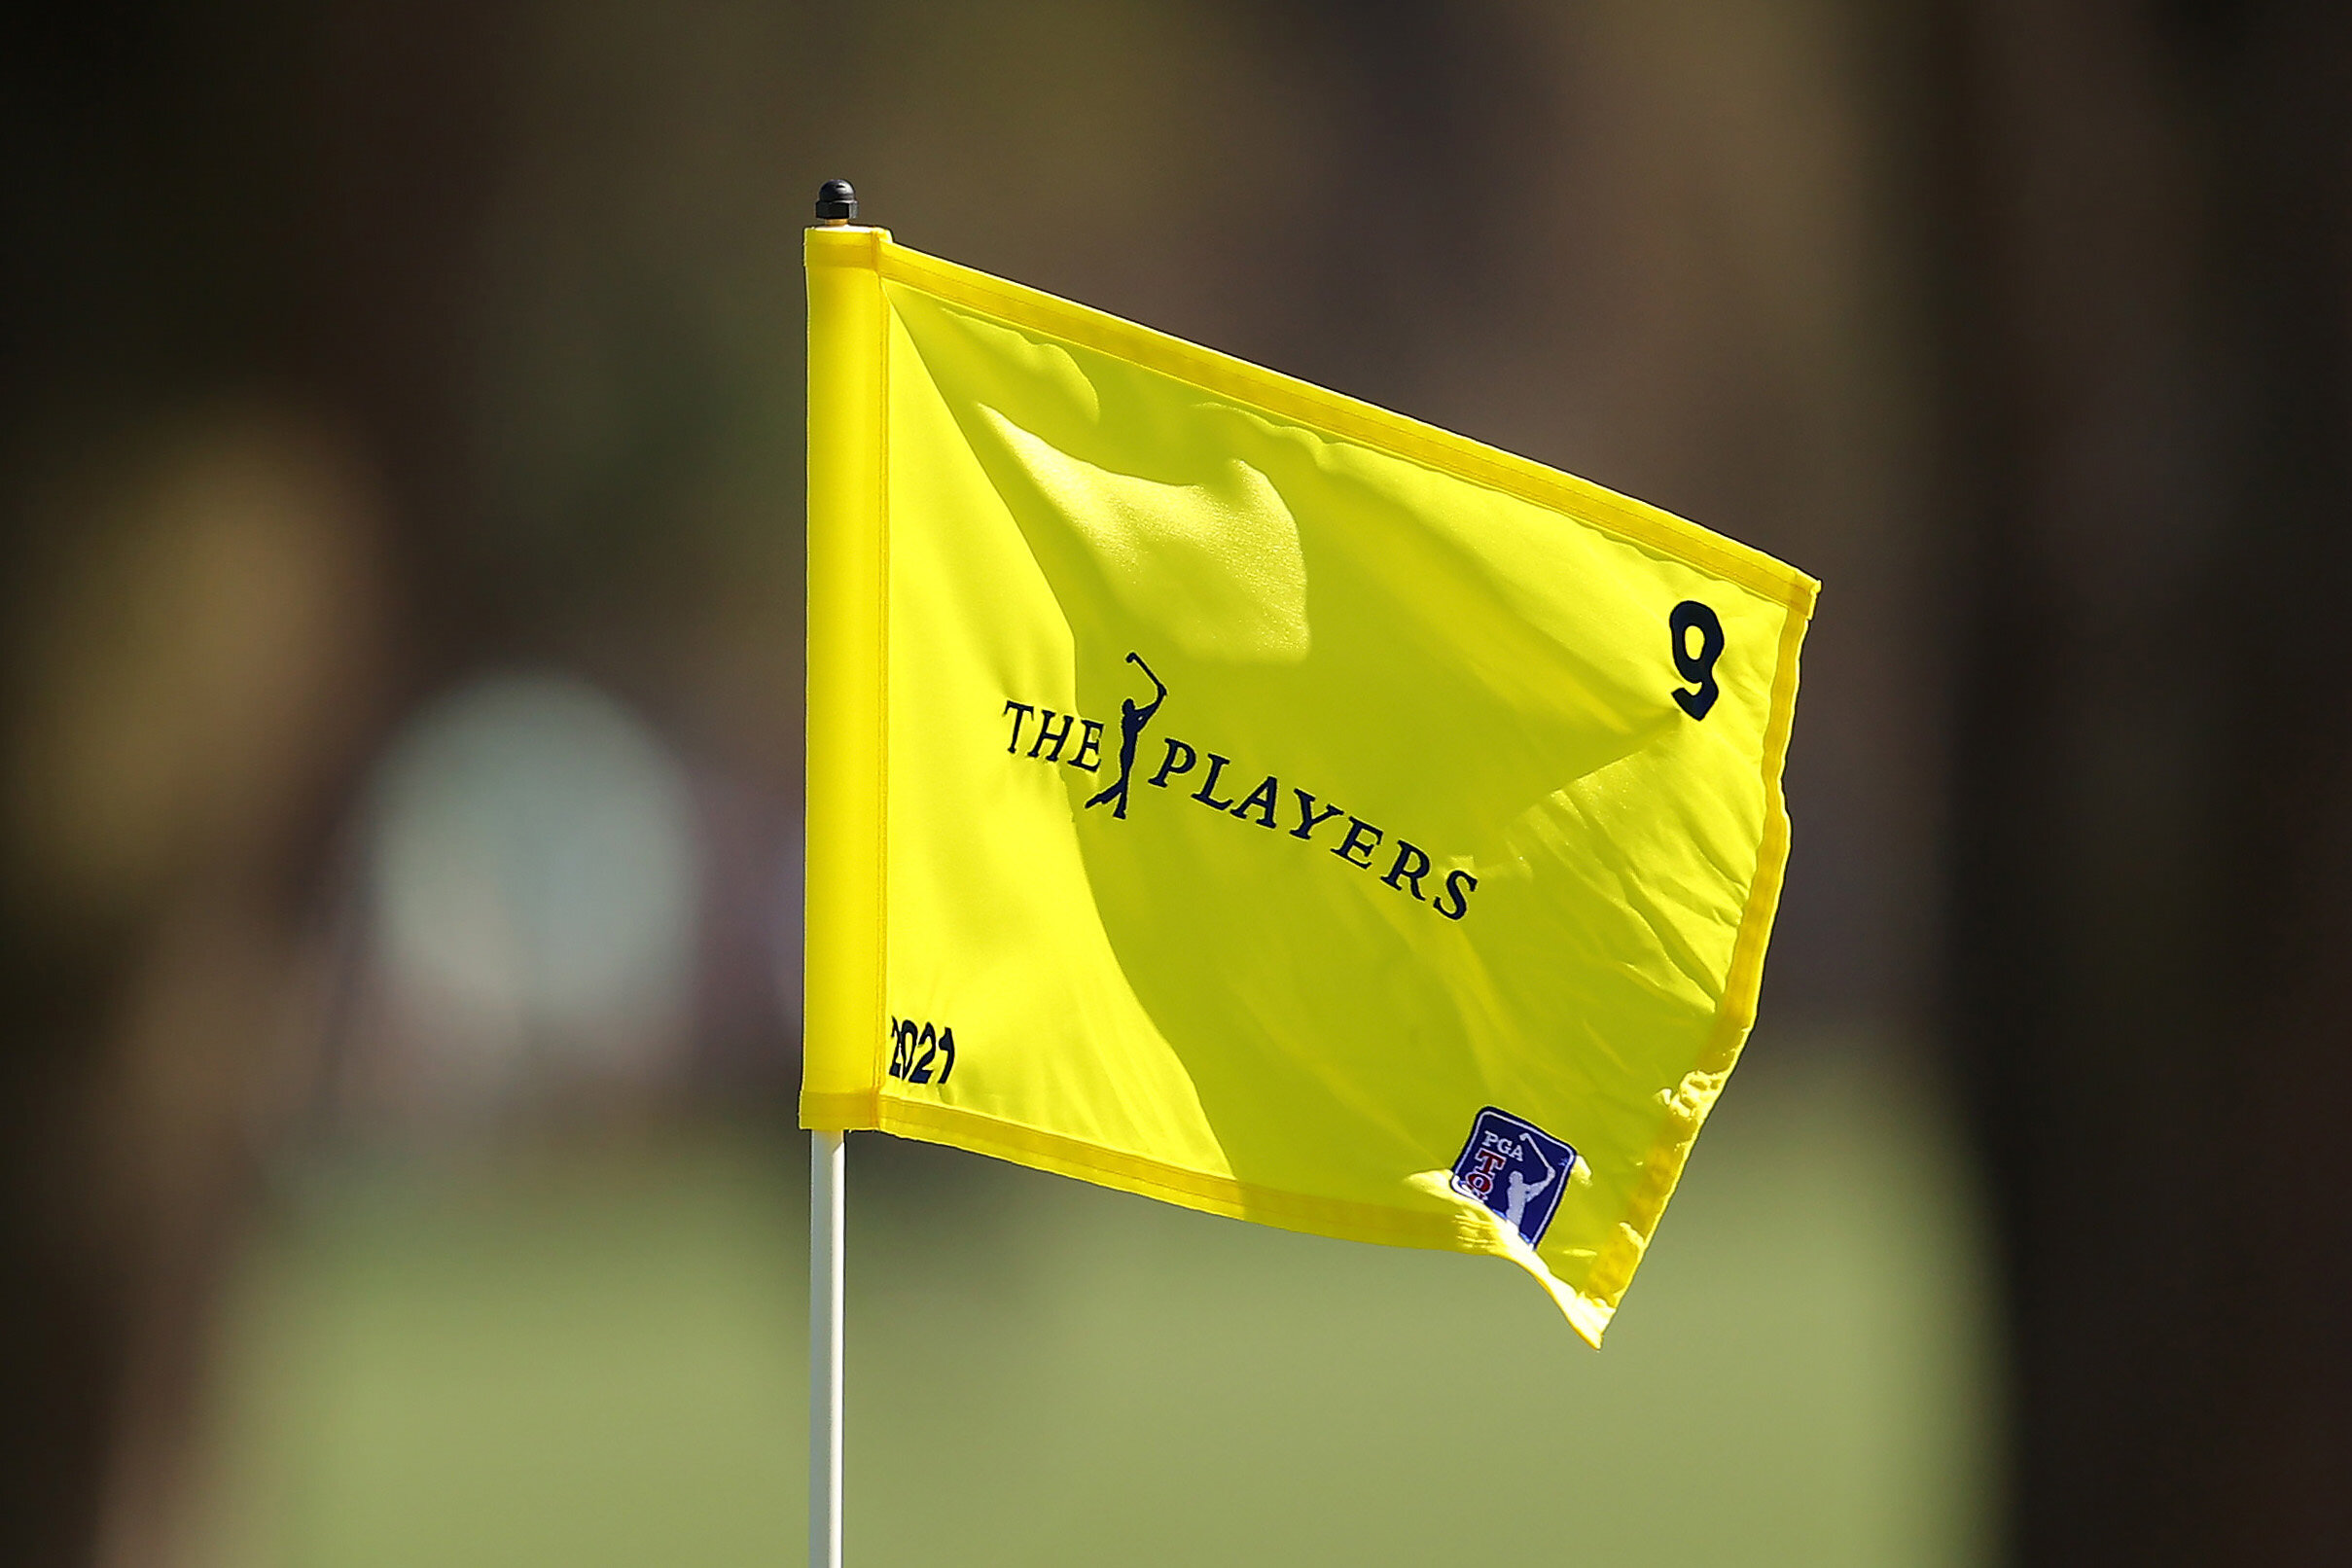  PONTE VEDRA BEACH, FLORIDA - MARCH 11: A pin flag is displayed during the first round of THE PLAYERS Championship on THE PLAYERS Stadium Course at TPC Sawgrass on March 11, 2021 in Ponte Vedra Beach, Florida. (Photo by Kevin C. Cox/Getty Images) 